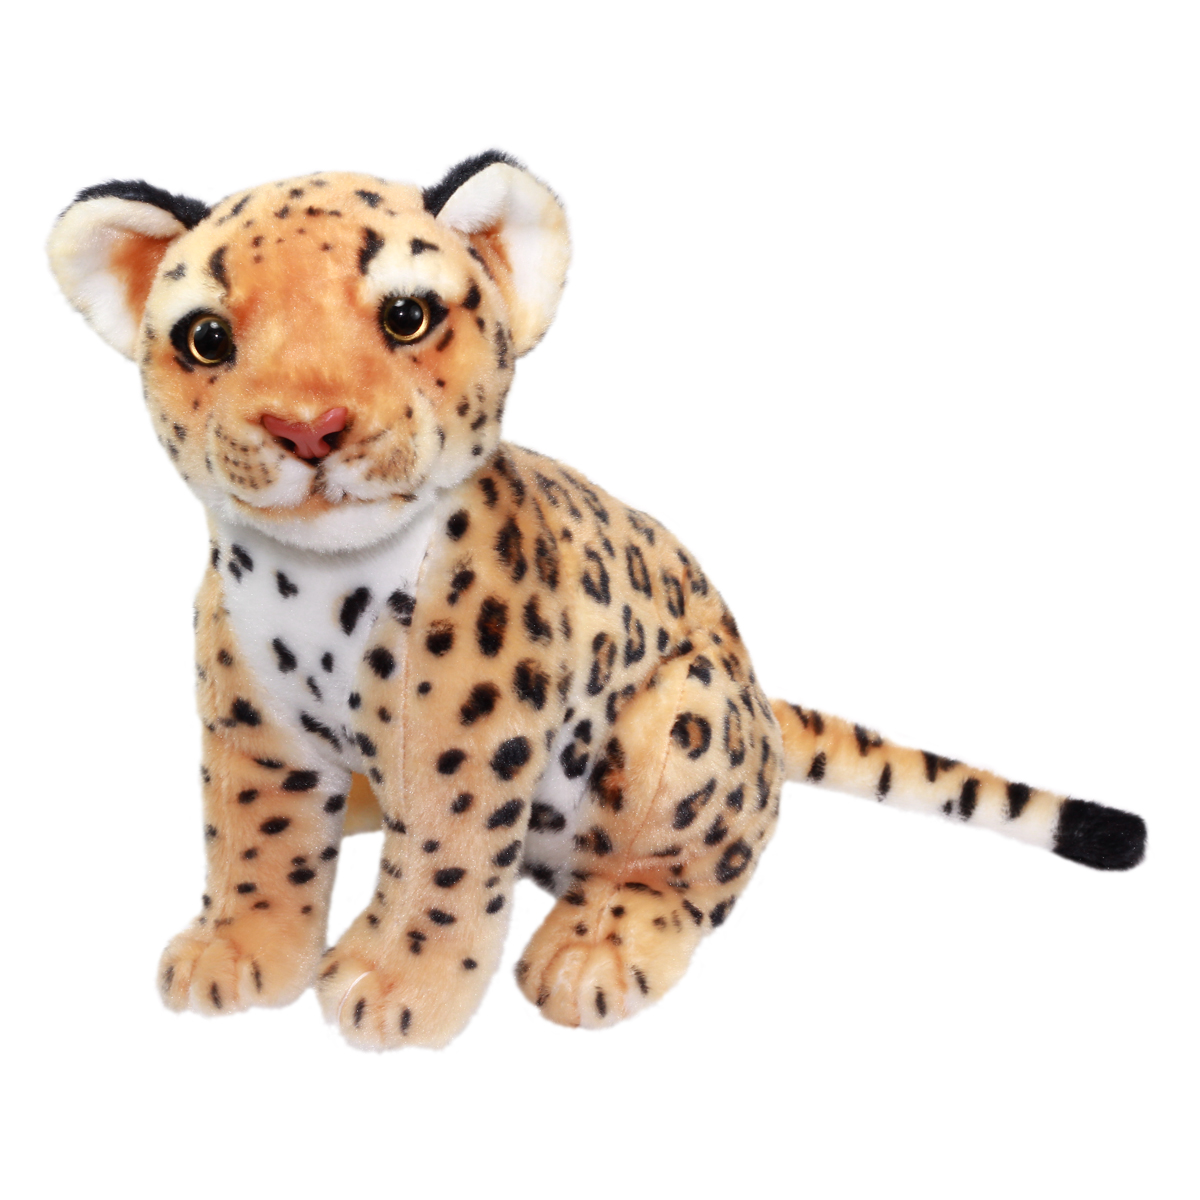 Real Animal Plush Collection Stuffed Animal Toy Leopard 10 Inches